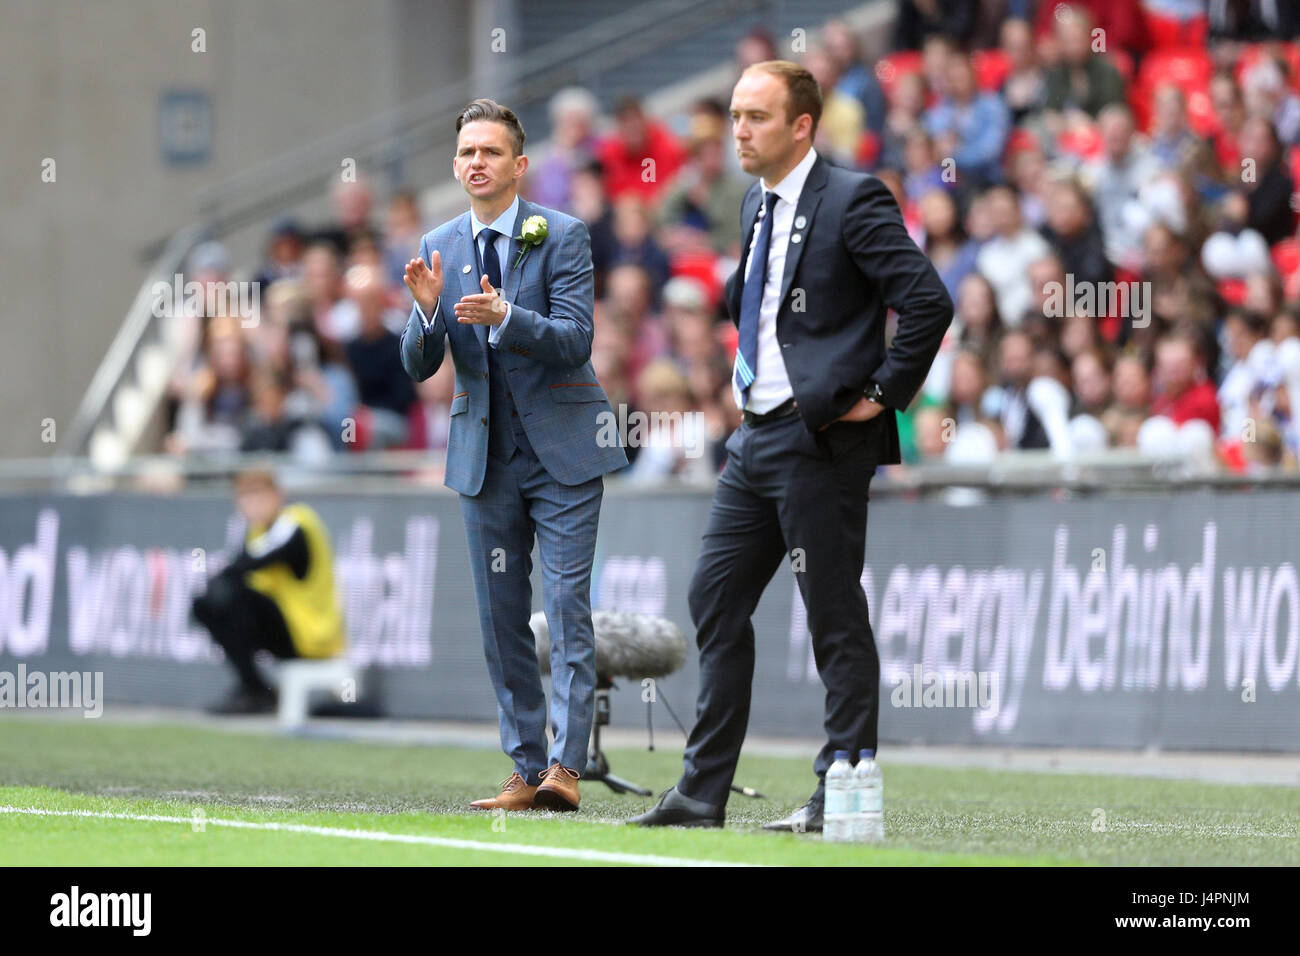 Birmingham City Ladies manager Marc Skinner (left) and Manchester City Ladies manager Nick Cushing on the touchline during the SSE Women's FA Cup Final at Wembley Stadium, London. Stock Photo